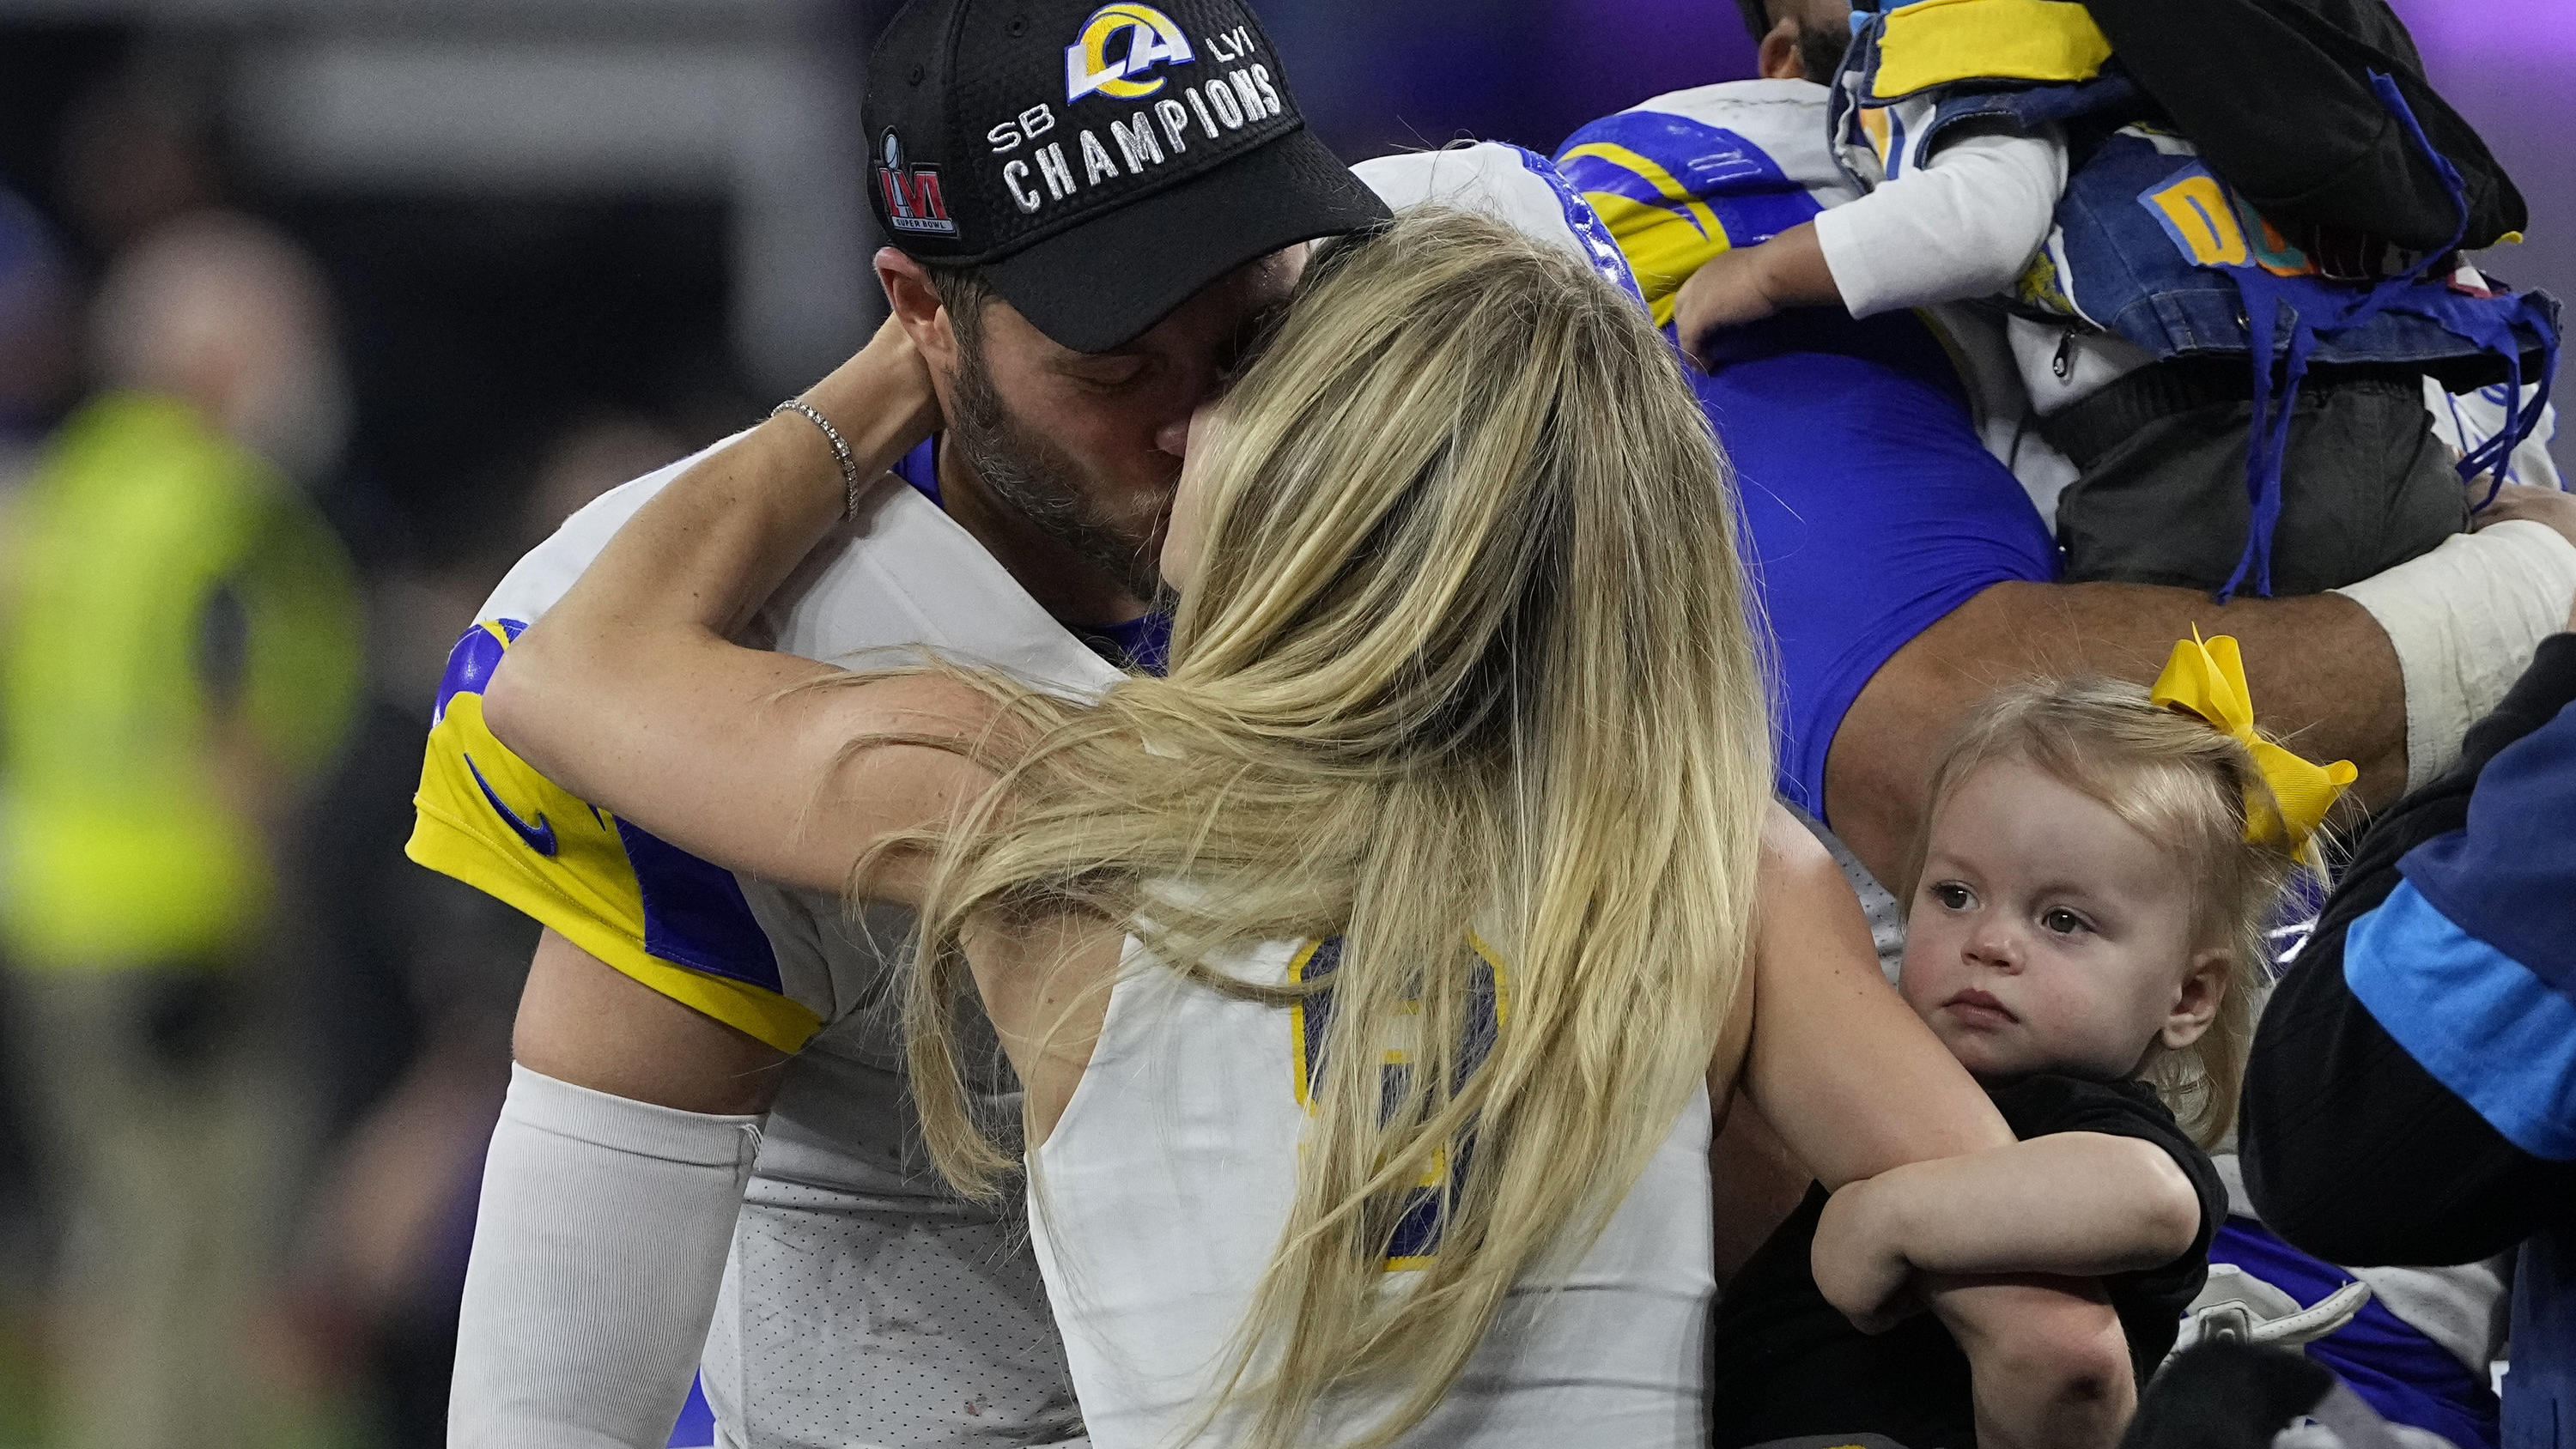 Los Angeles Rams quarterback Matthew Stafford kisses his wife Kelly Hall after the NFL Super Bowl 56 football game against the Cincinnati Bengals, Sunday, Feb. 13, 2022, in Inglewood, Calif. The Los Angeles Rams won 23-20. (AP Photo/Tony Gutierrez)